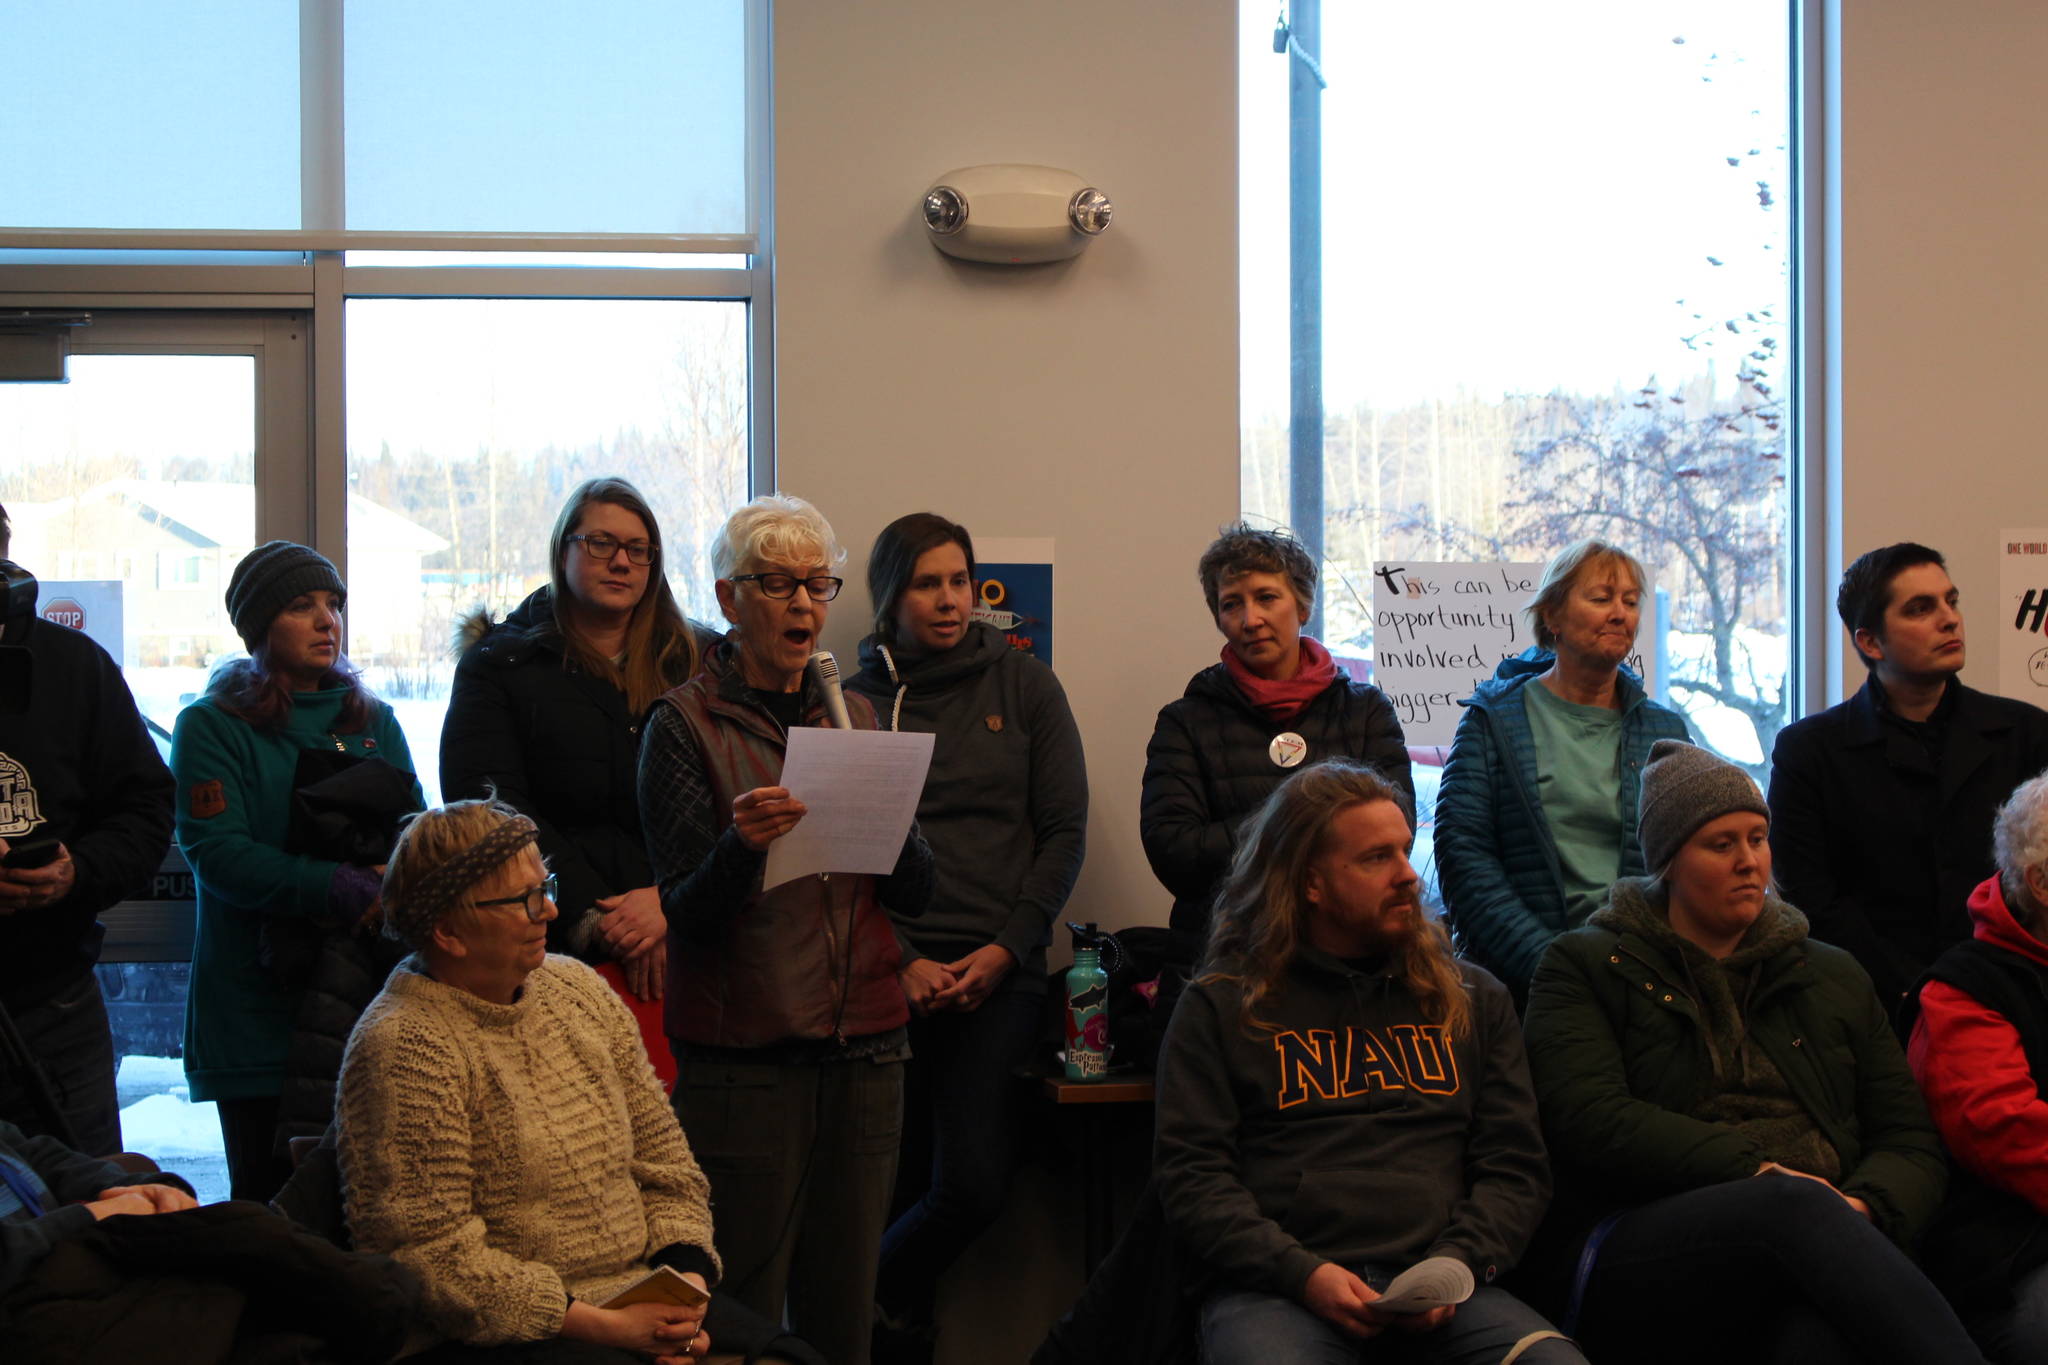 Moderator Suzie Smalley lays out the ground rules for the LGBTQ Town Hall at the Soldotna Public Library in Soldotna, Alaska on Jan. 4, 2020. (Photo by Brian Mazurek/Peninsula Clarion)